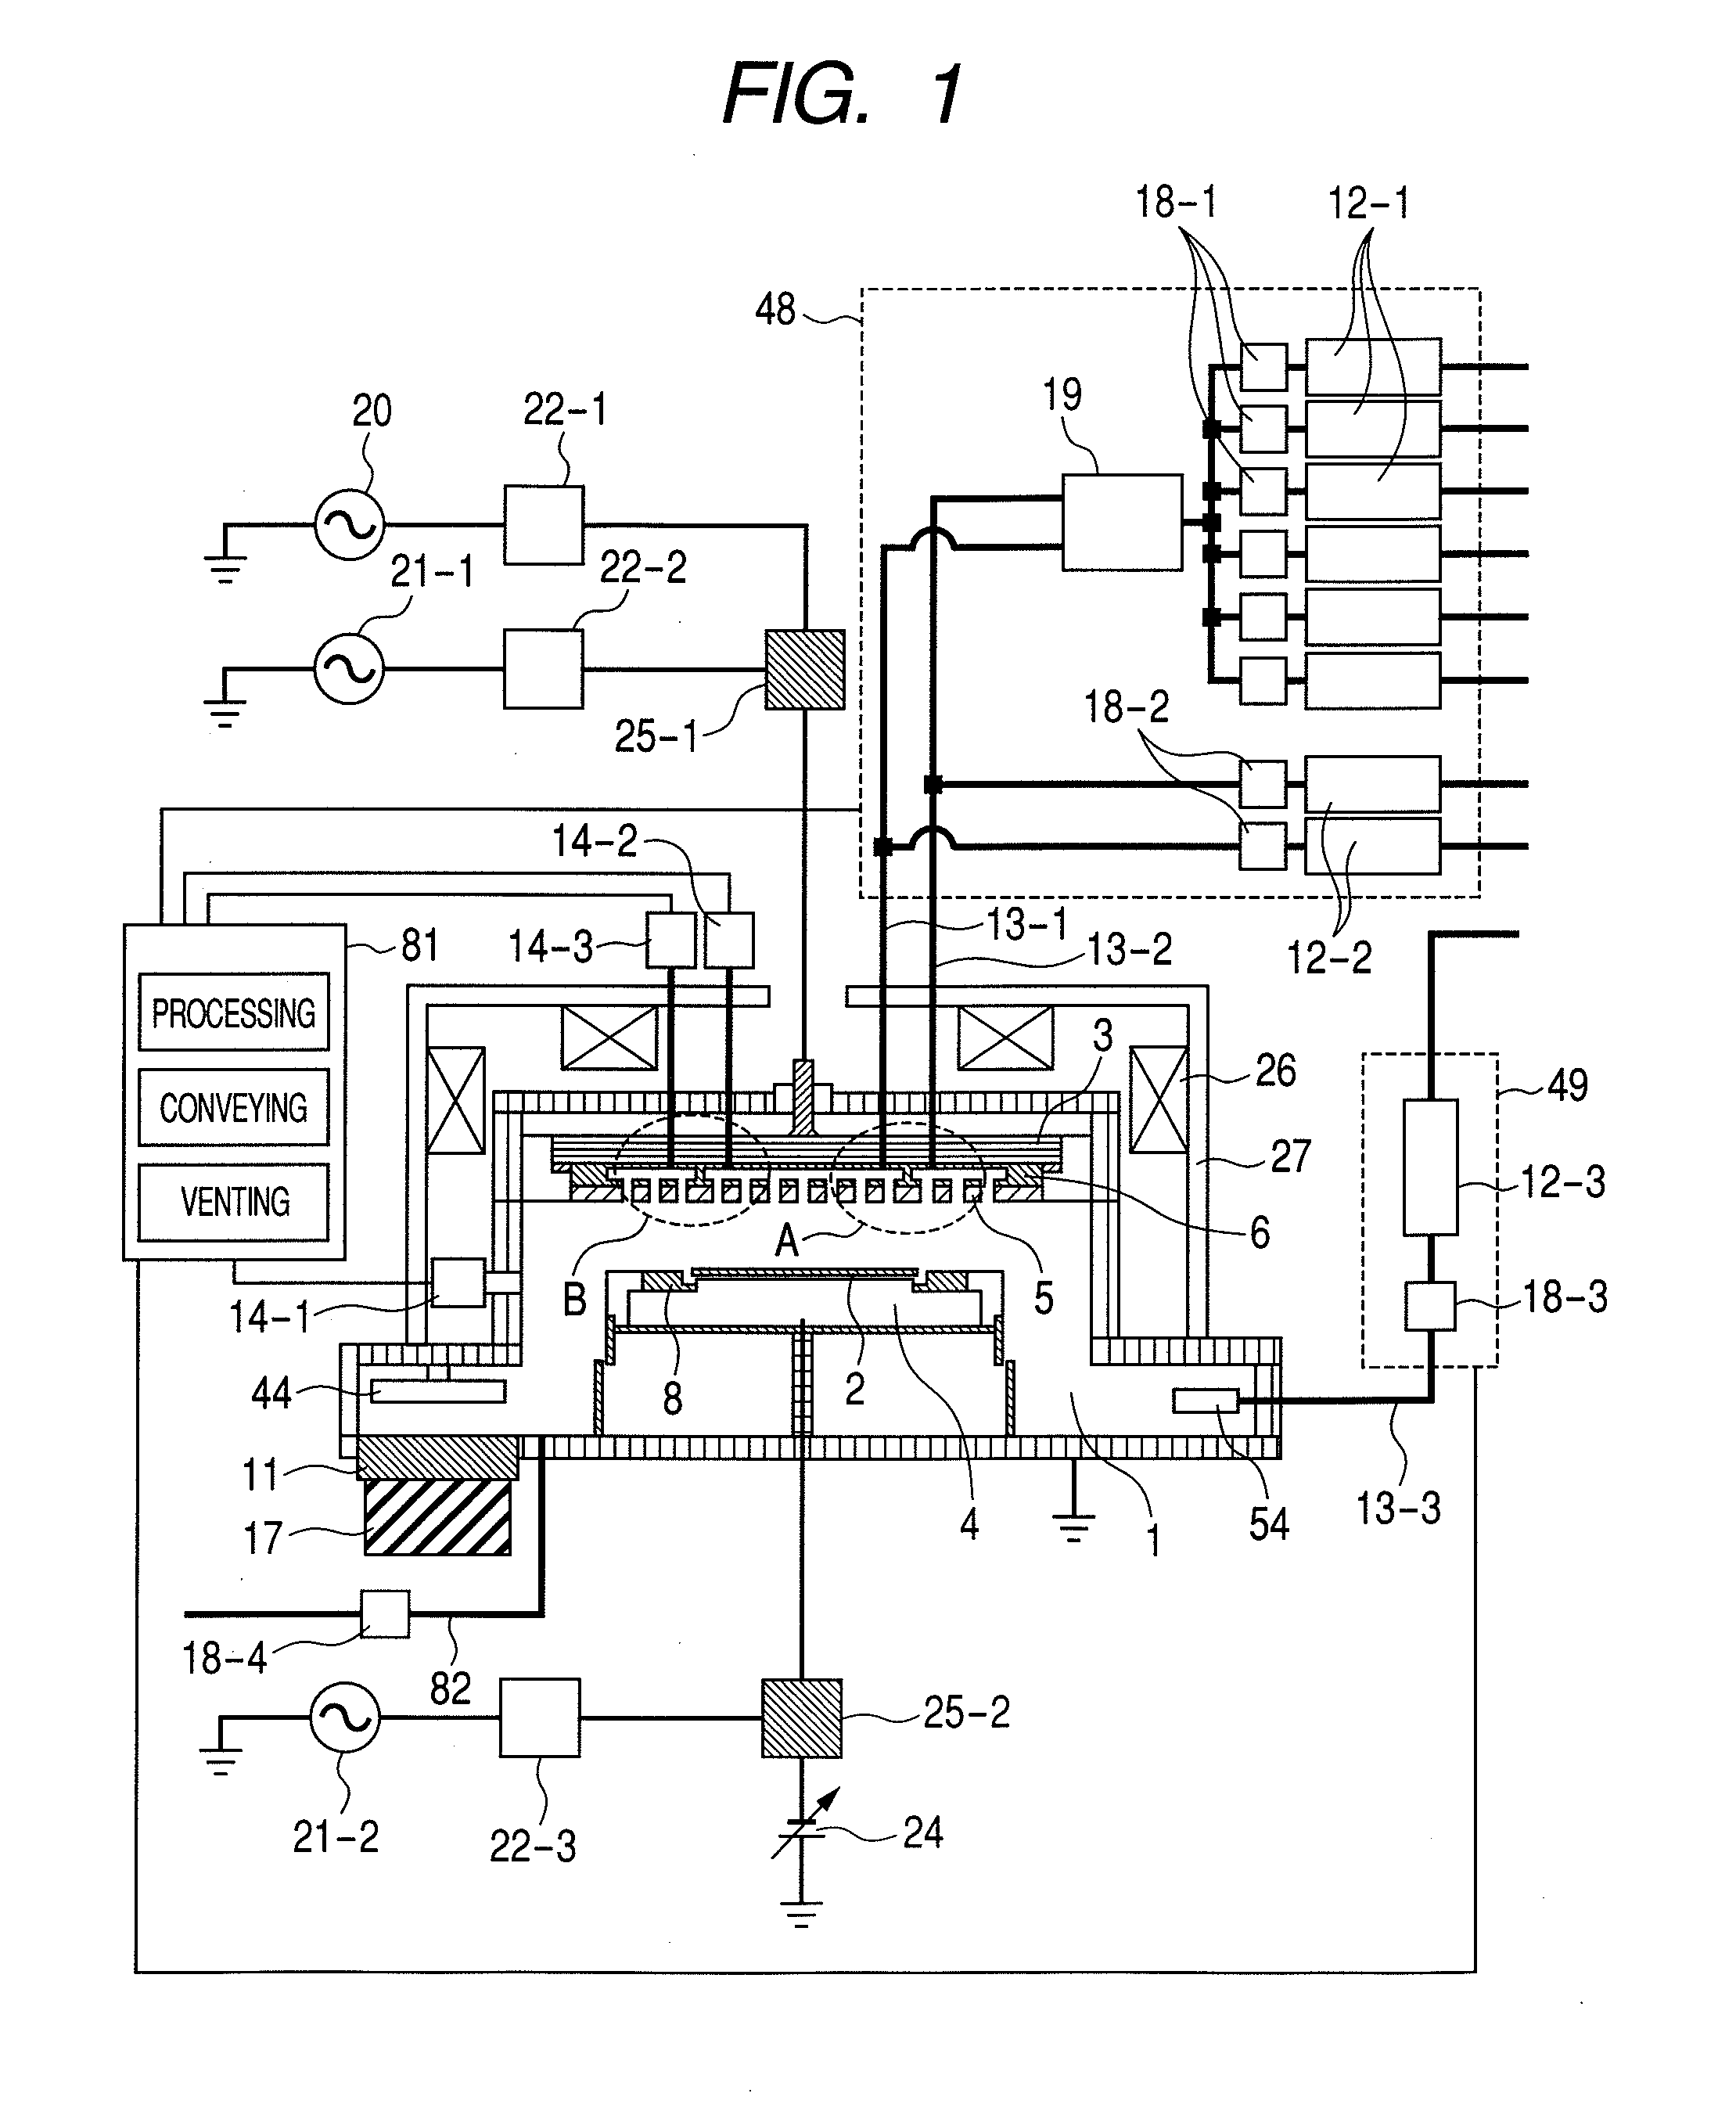 Plasma Processing Apparatus and Method for Venting the Same to Atmosphere